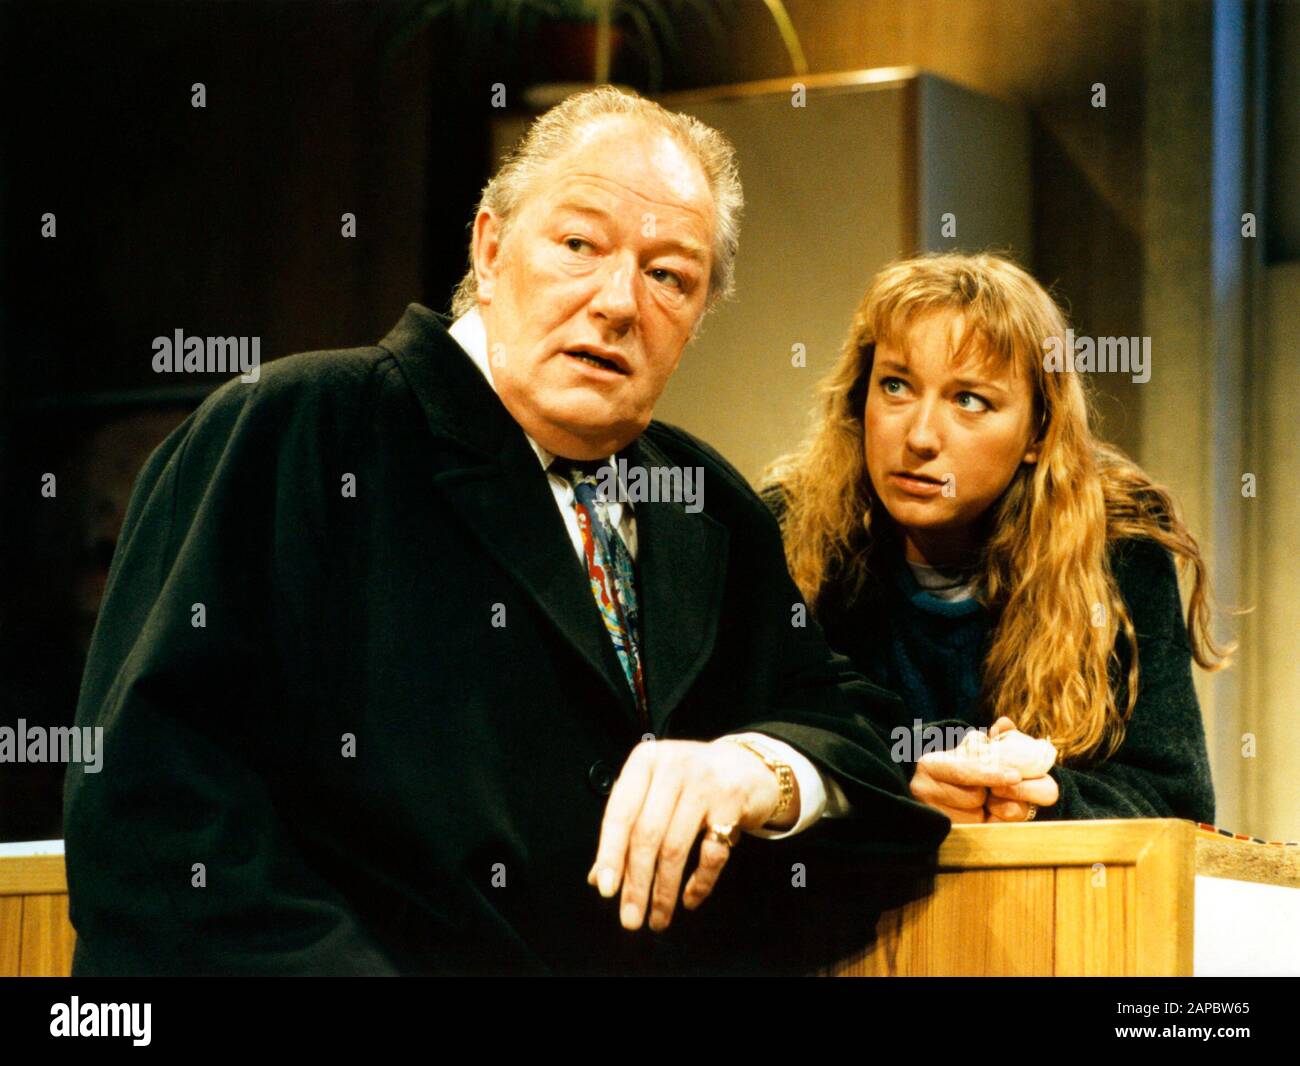 Michael Gambon (Tom Sergeant) with Lia Williams (Kyra Hollis) in SKYLIGHT by David Hare directed by Richard Eyre at the Cottesloe Theatre, National Theatre (NT) London in 1995. Michael John Gambon, born in Cabra, Dublin in 1940, moved to London at the age of 6 and became a British citizen. Knighted in 1998. Multi-award-winner, including 3 Oliviers and 4 BAFTAs. Stock Photo